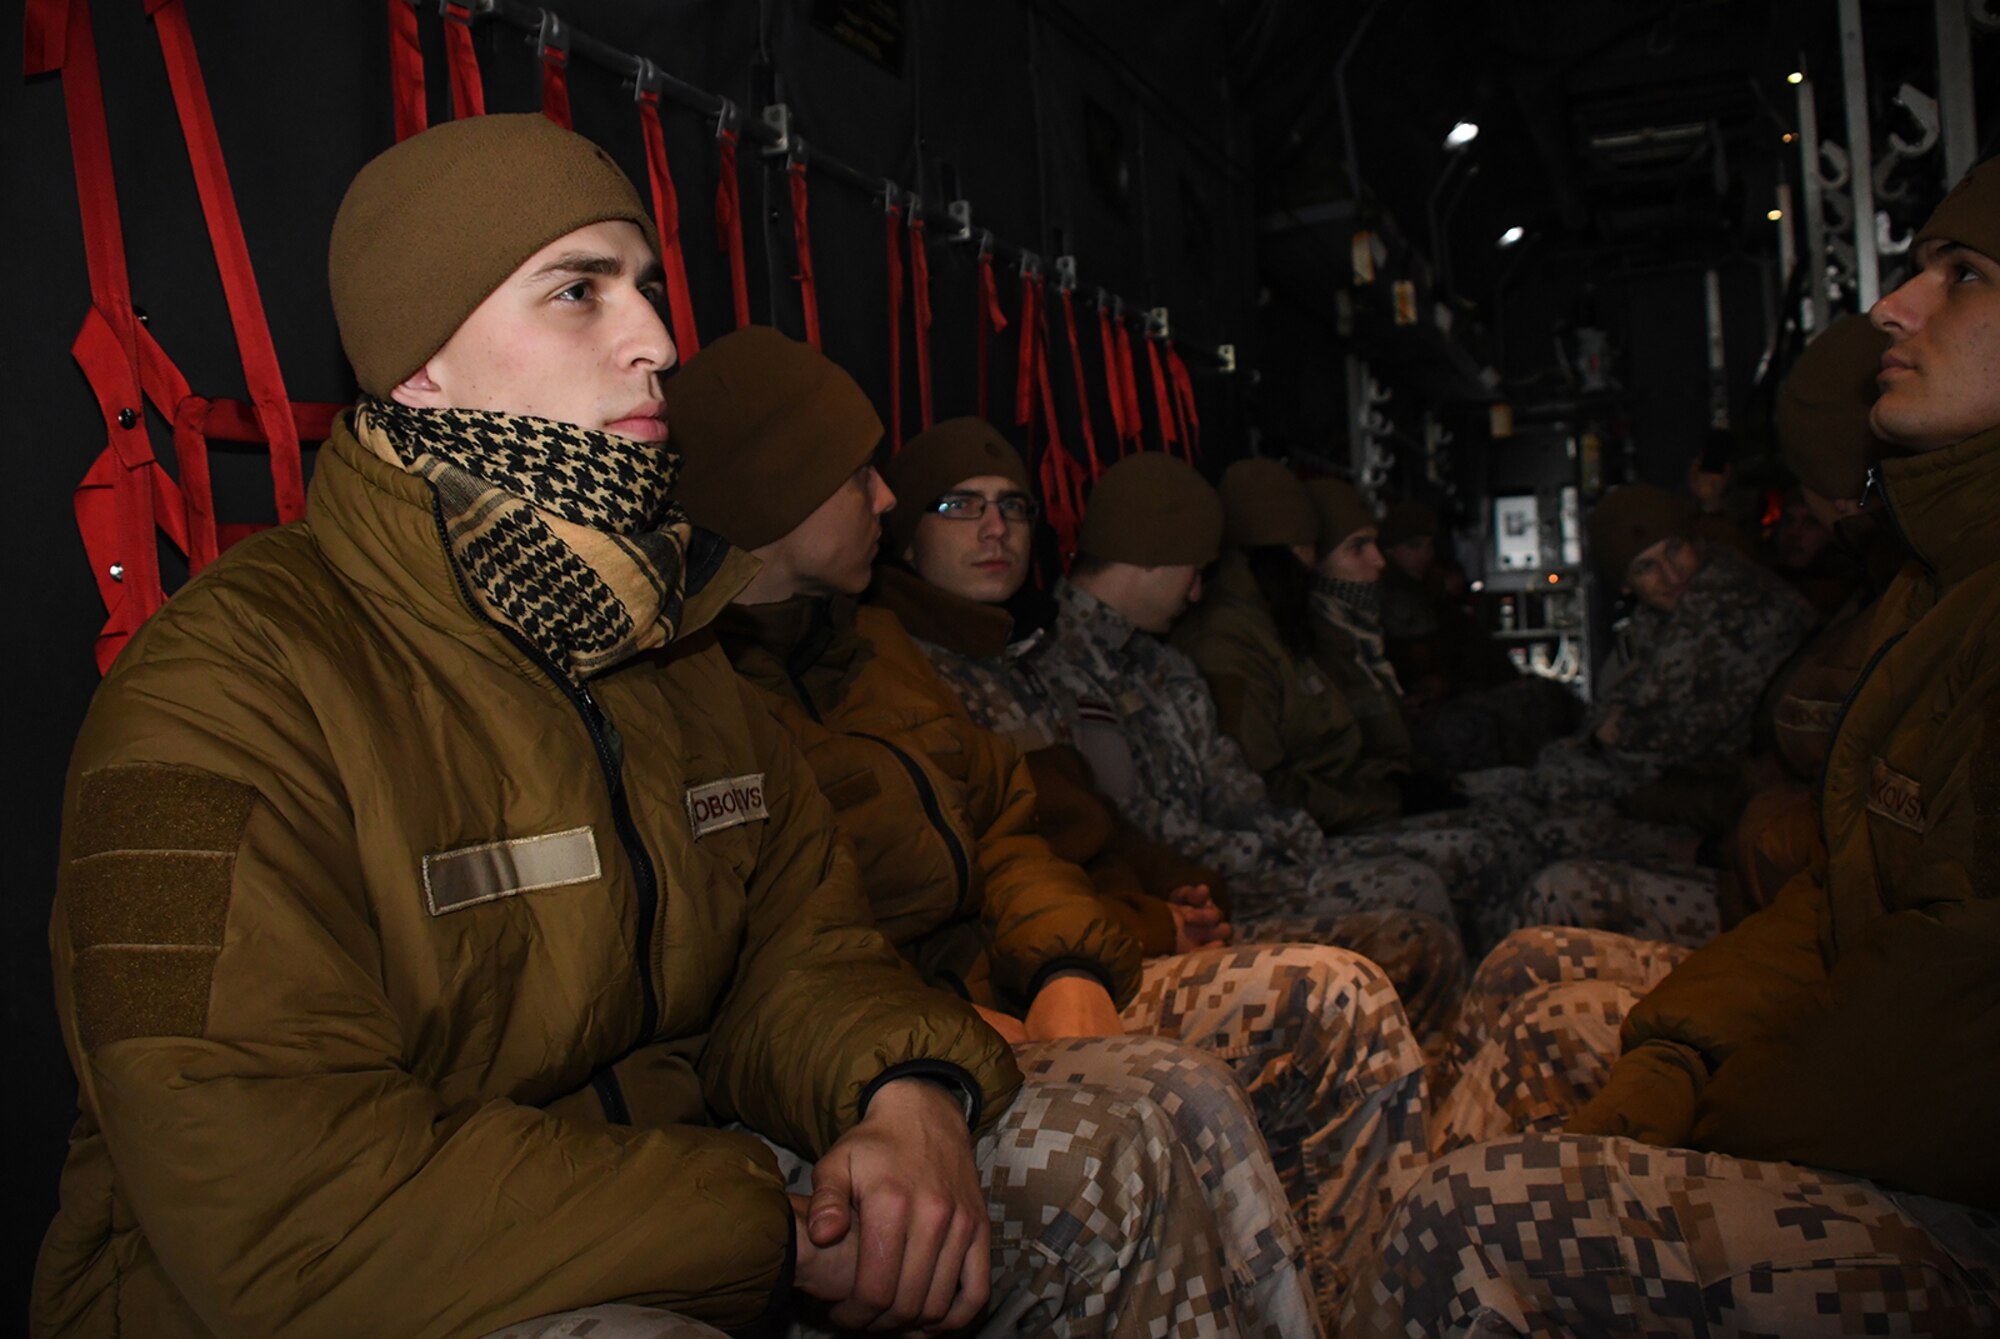 Latvian air force members sit in the cargo area of a C-130H from Dobbins Air Reserve Base, Ga., while parked on the runway at Lielvarde Air Base, Latvia, during Sky Fist, Oct. 6, 2016. Sky Fist was a bilateral, aircraft mishap training exercise designed to strengthen the partnership between the U.S. and Latvia. (U.S. Air Force photo by Staff Sgt. Alan Abernethy)
